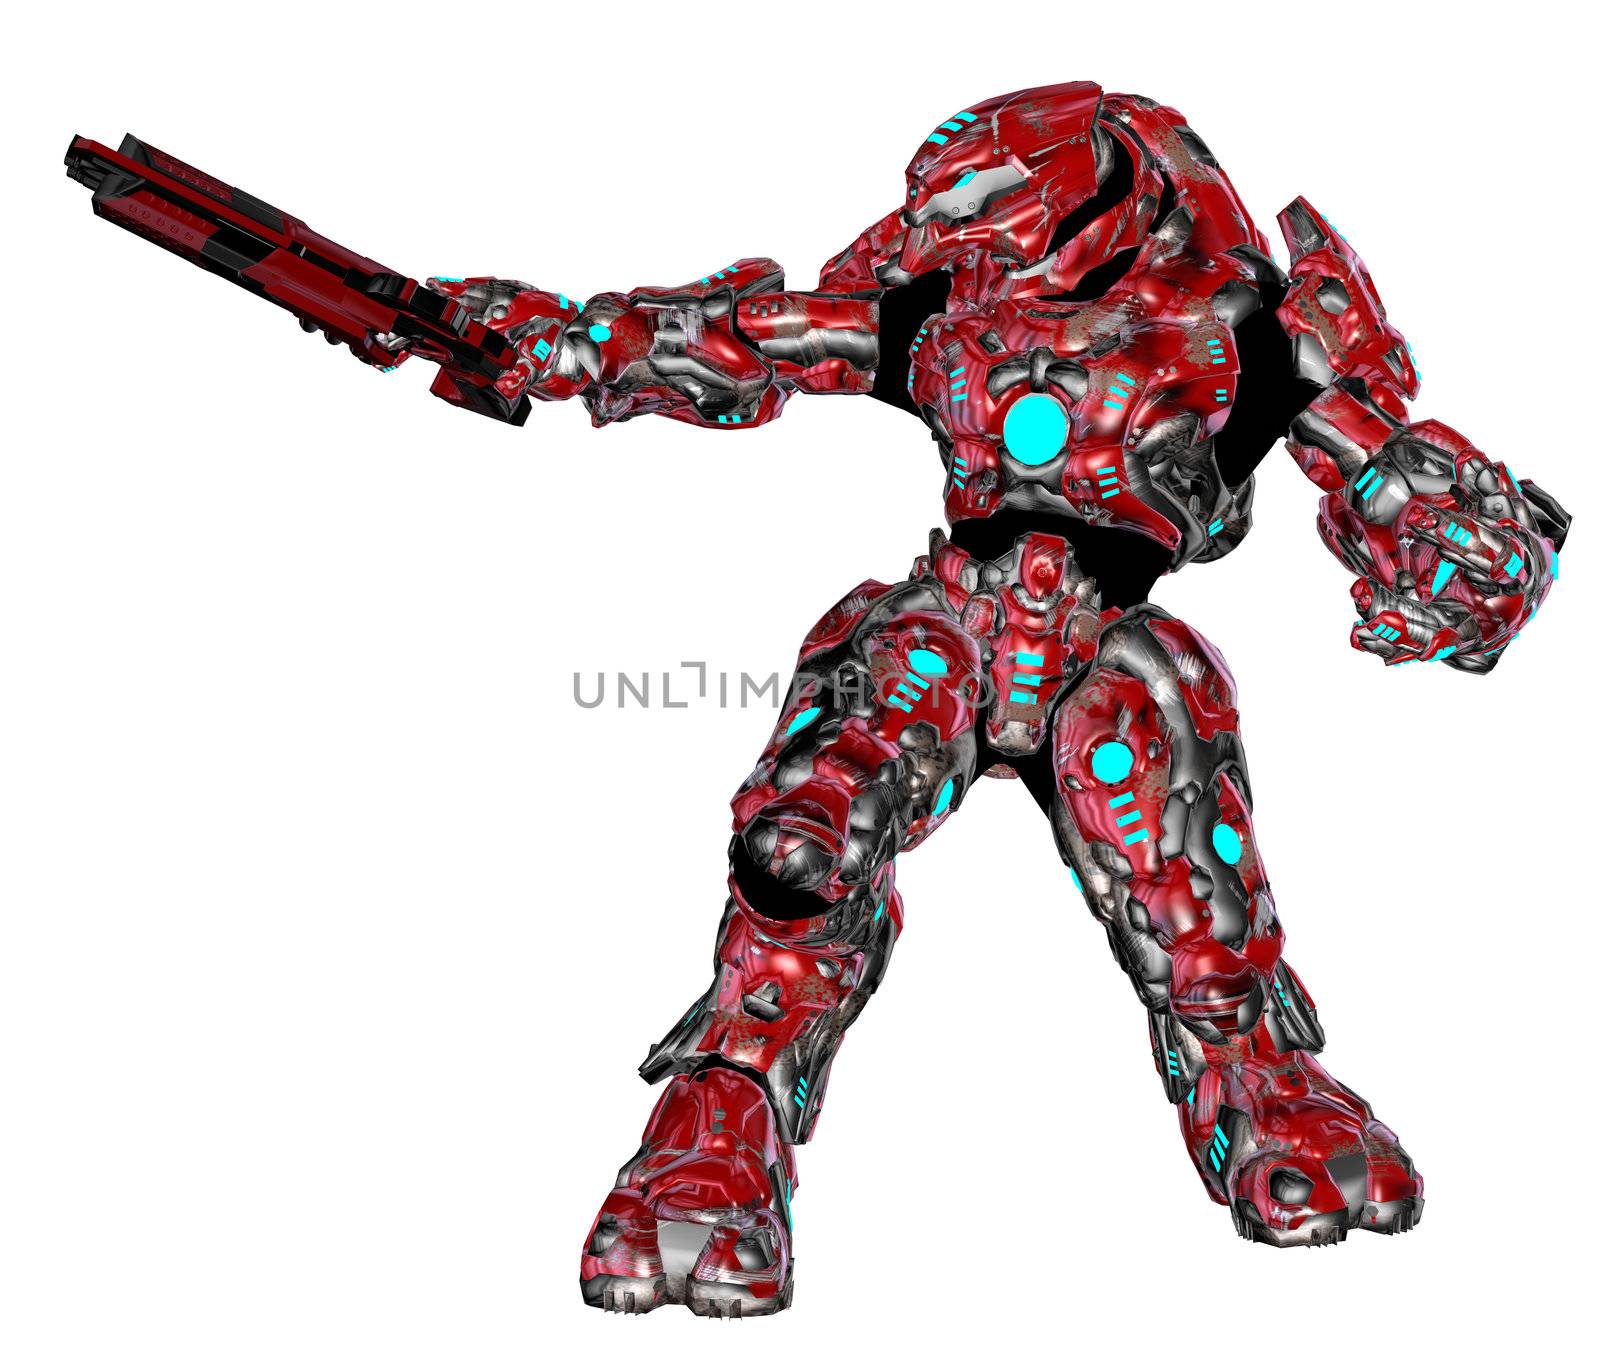 3D rendered scifi alien robot on white background isolated